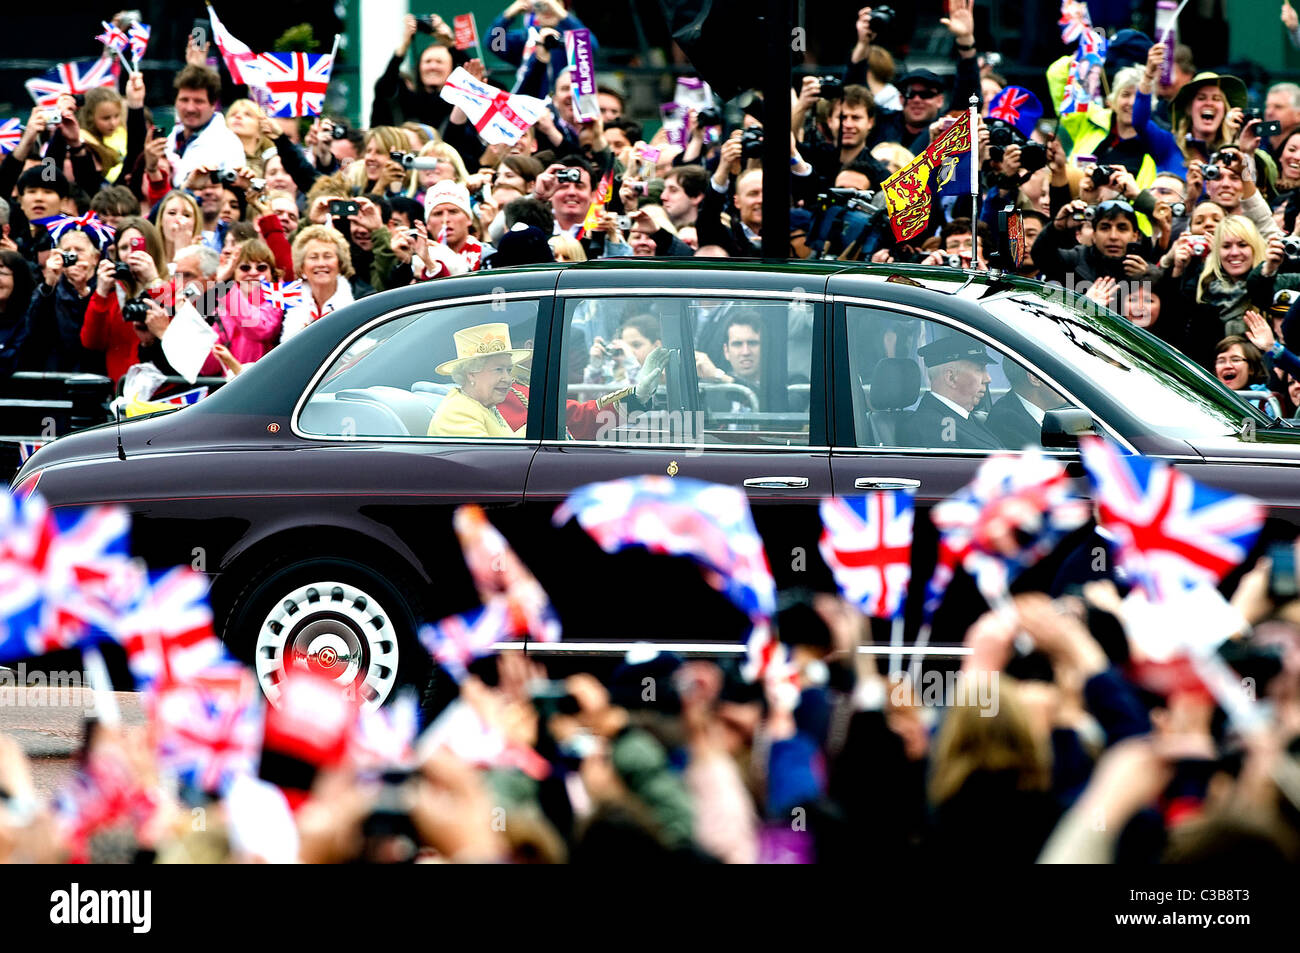 Royal  Wedding of Prince William and Catherine Middleton. 29th April 2011 Queen Elizabeth II and her husband Prince Philip, Stock Photo